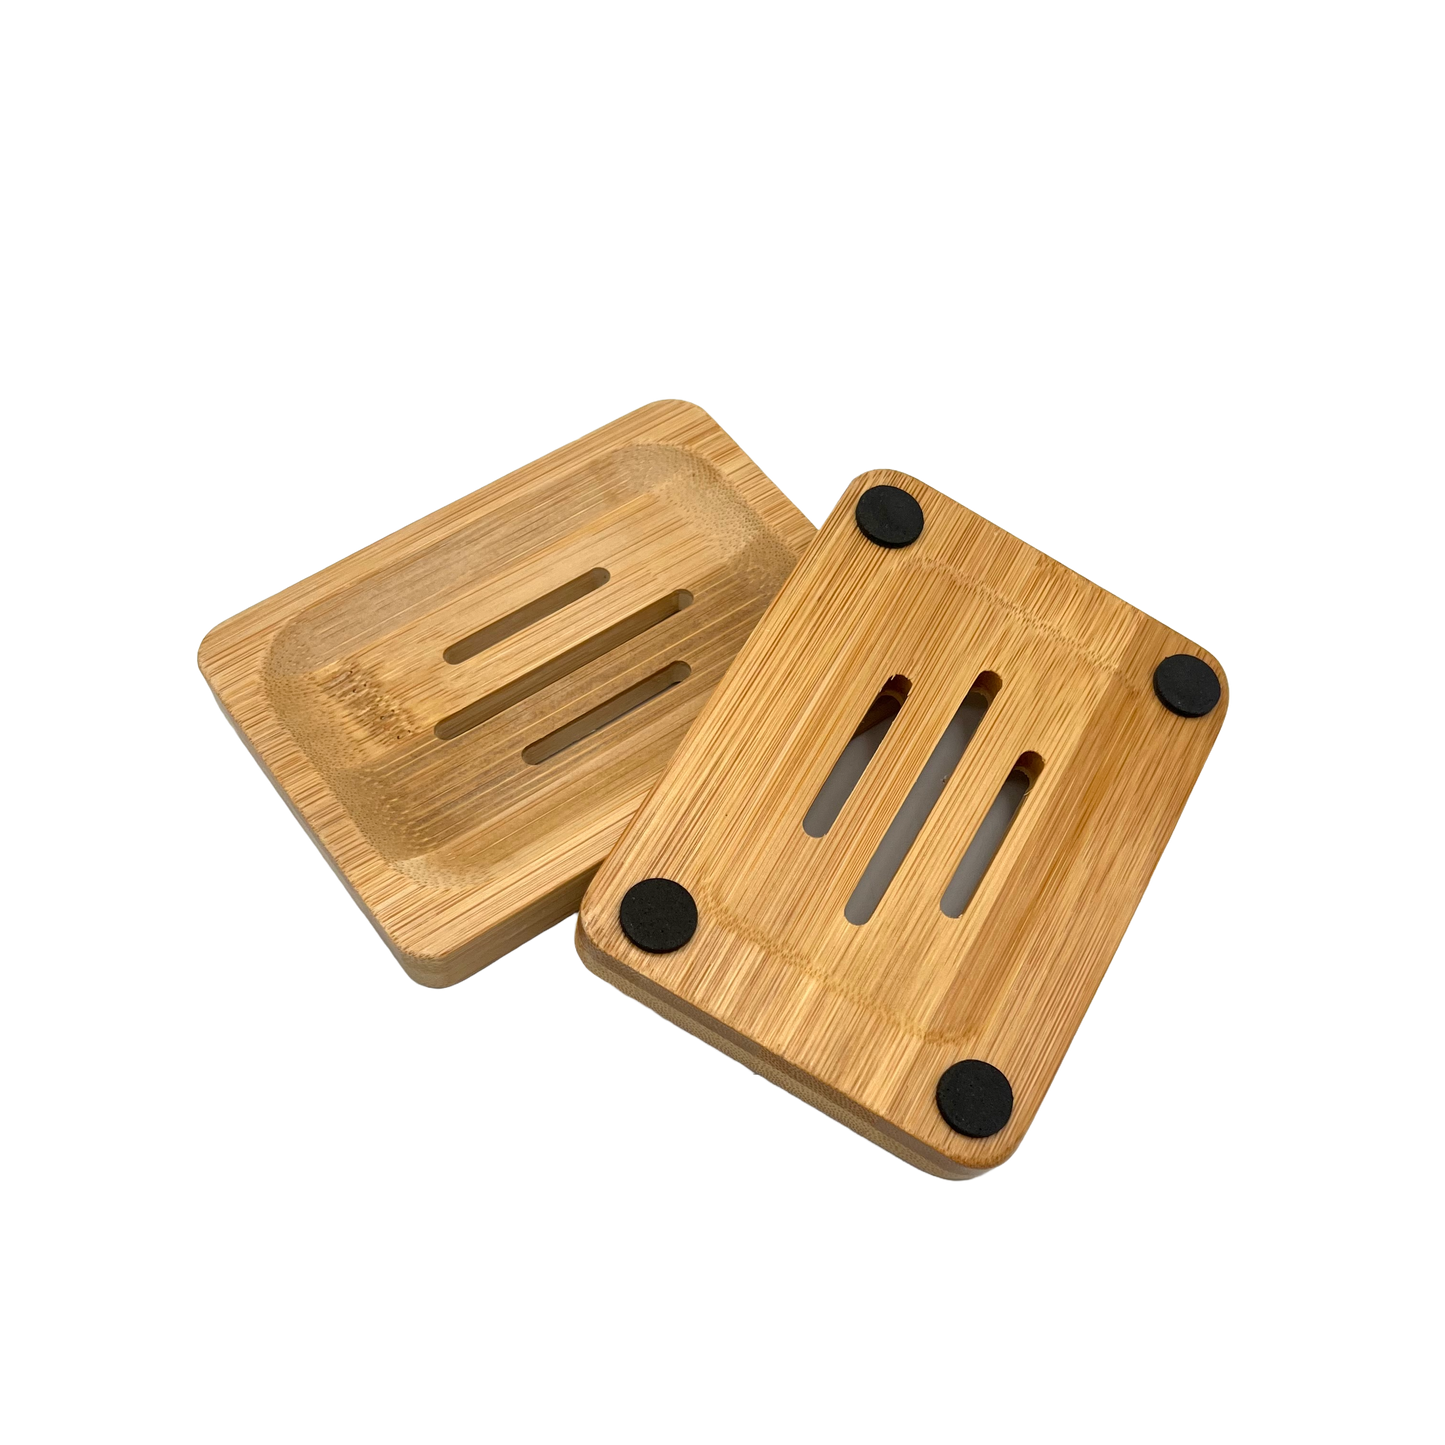 Wooden Rectangle Soap Dish